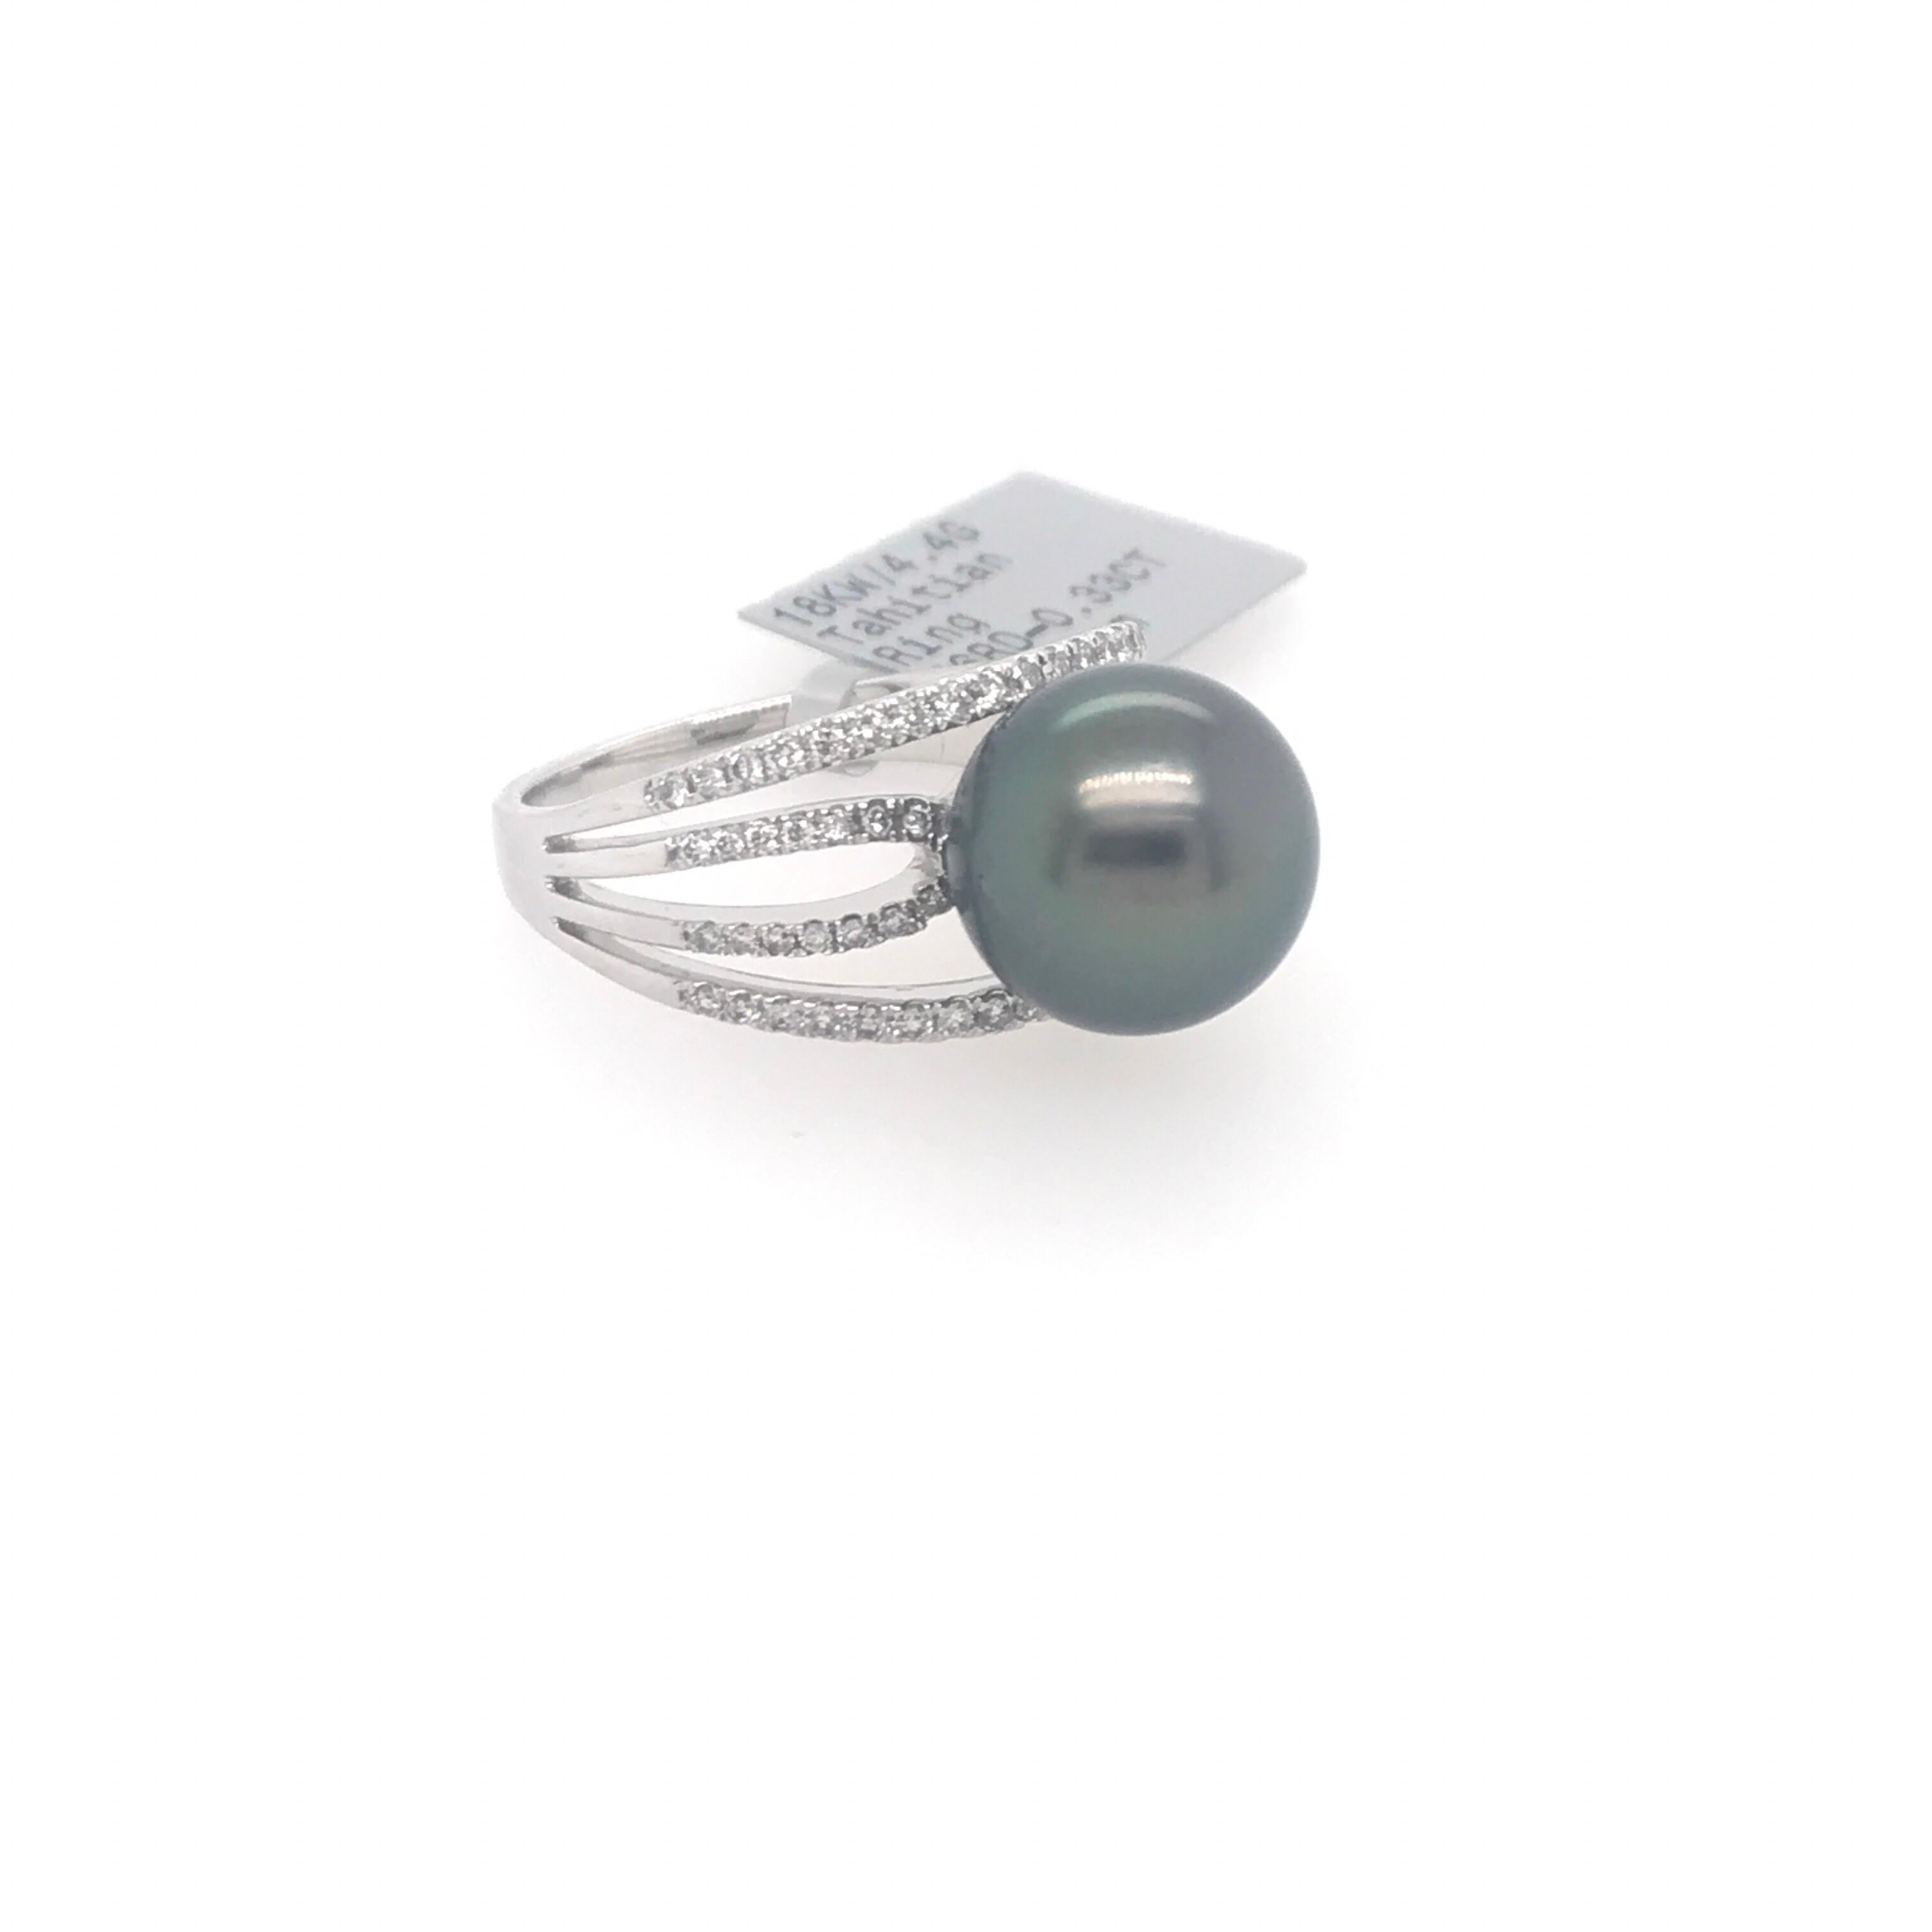 18K White Gold ring featuring one center Tahitian Pearl measuring 10-11 mm flanked with 4 rows of 66 round brilliants weighing 0.33 carats. 